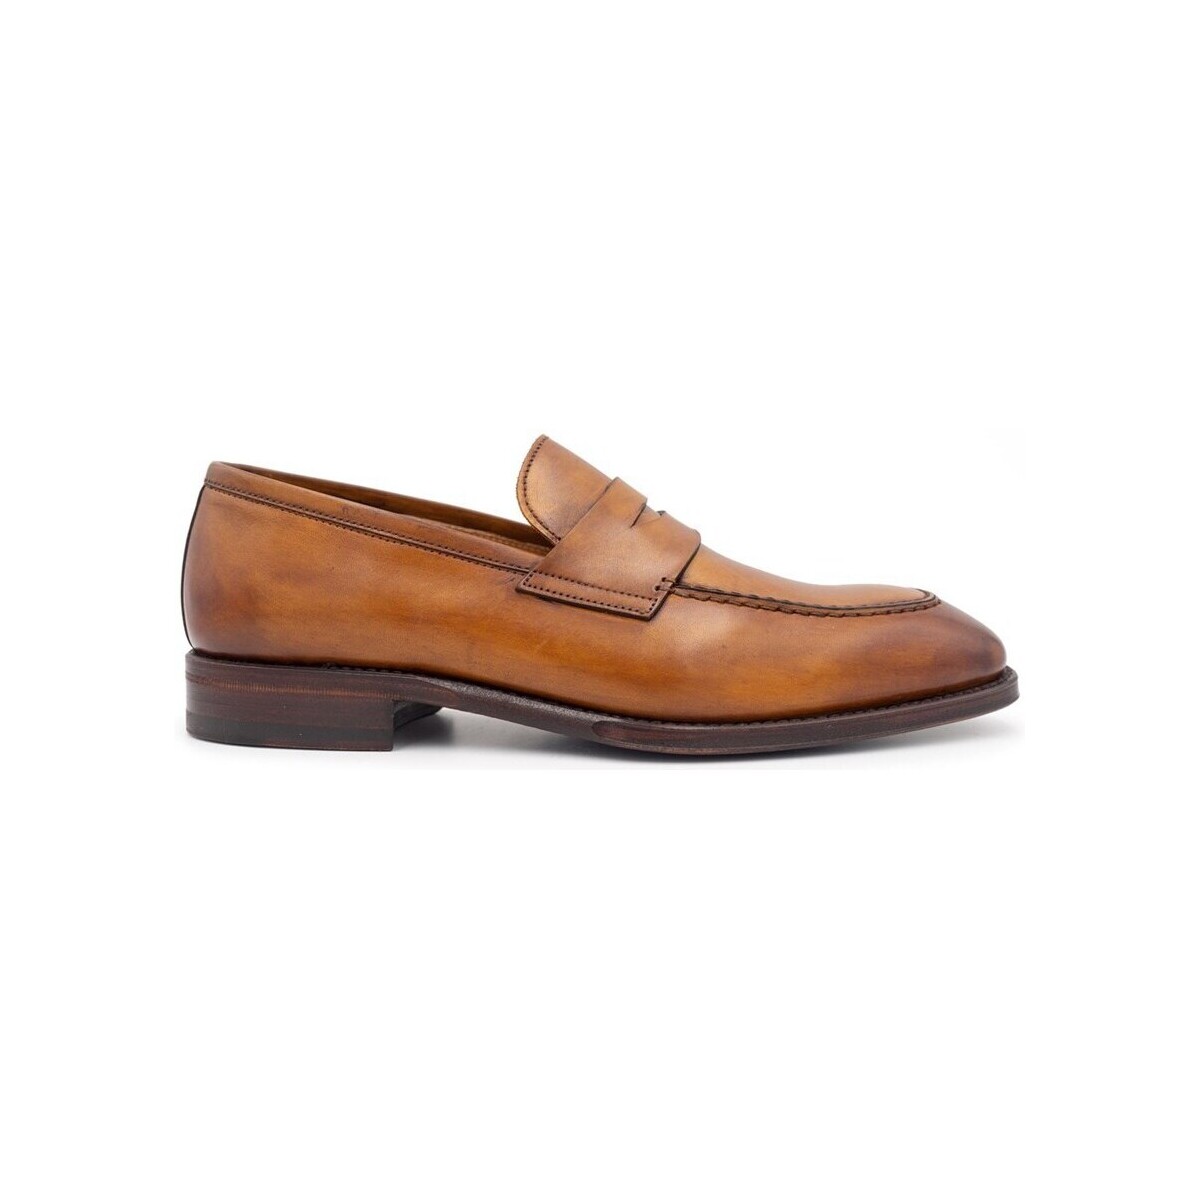 Chaussures Homme Mocassins Finsbury Shoes LINCOLN Marron